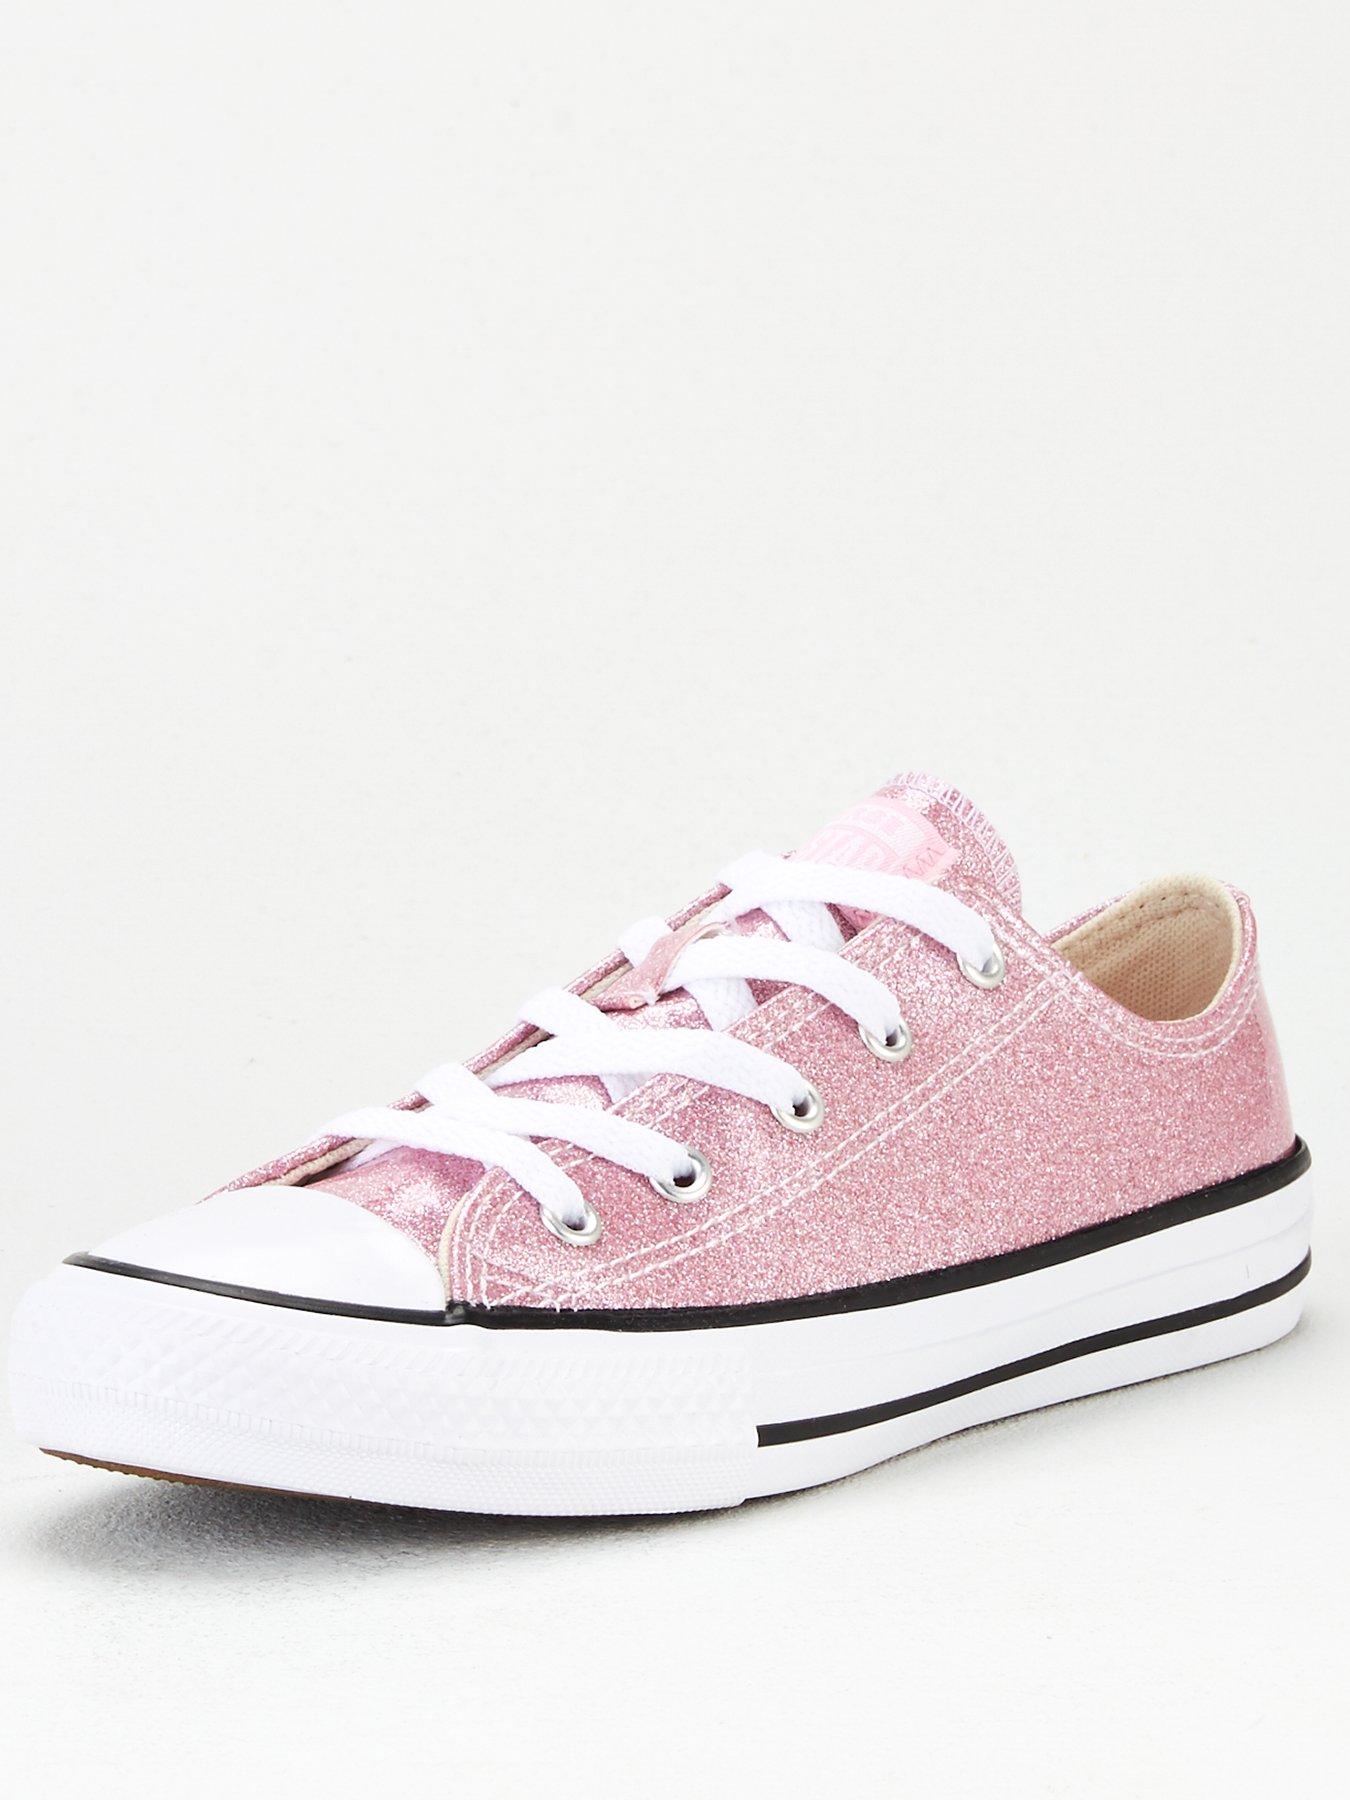 converse pink all star ox glitter trainers toddler